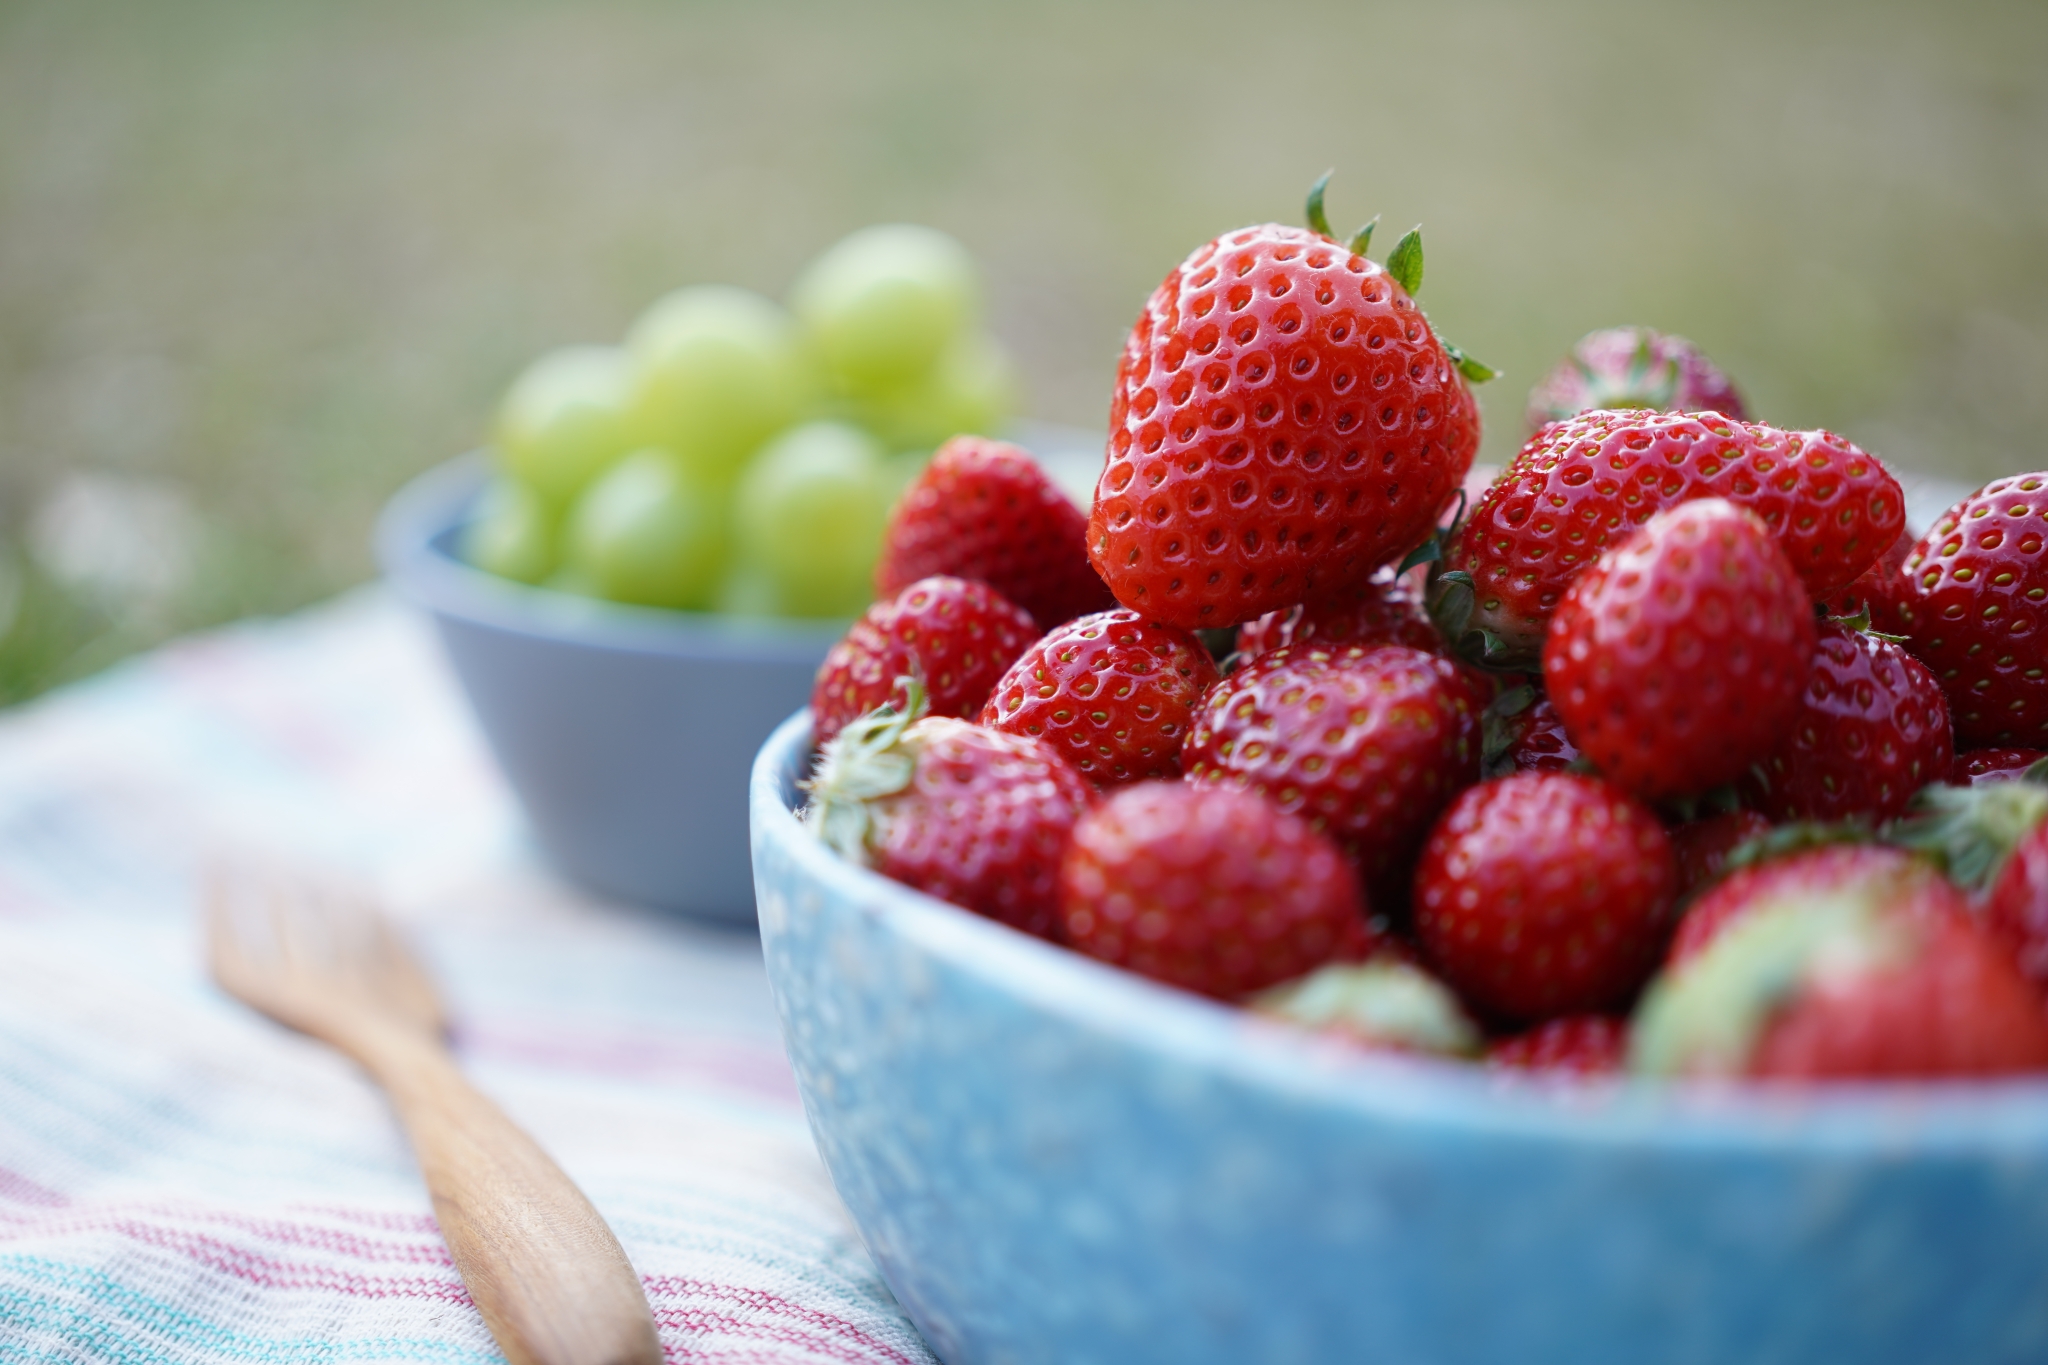 Bowl of strawberries with grapes in bokeh background